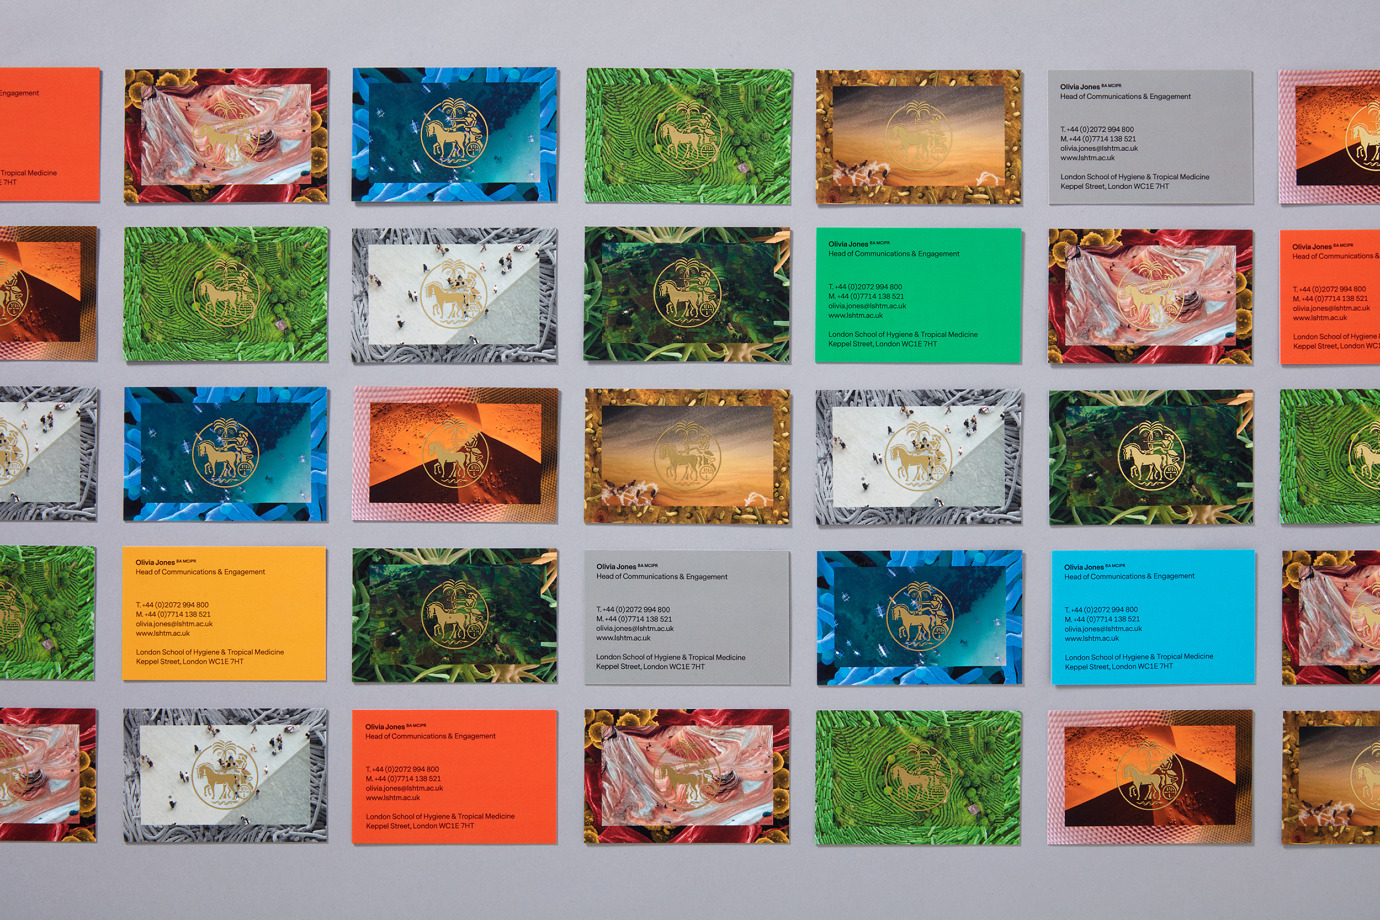 Graphic identity, prospectus, business and business cards etc. designed by Spy for London School of Hygiene & Tropical Medicine